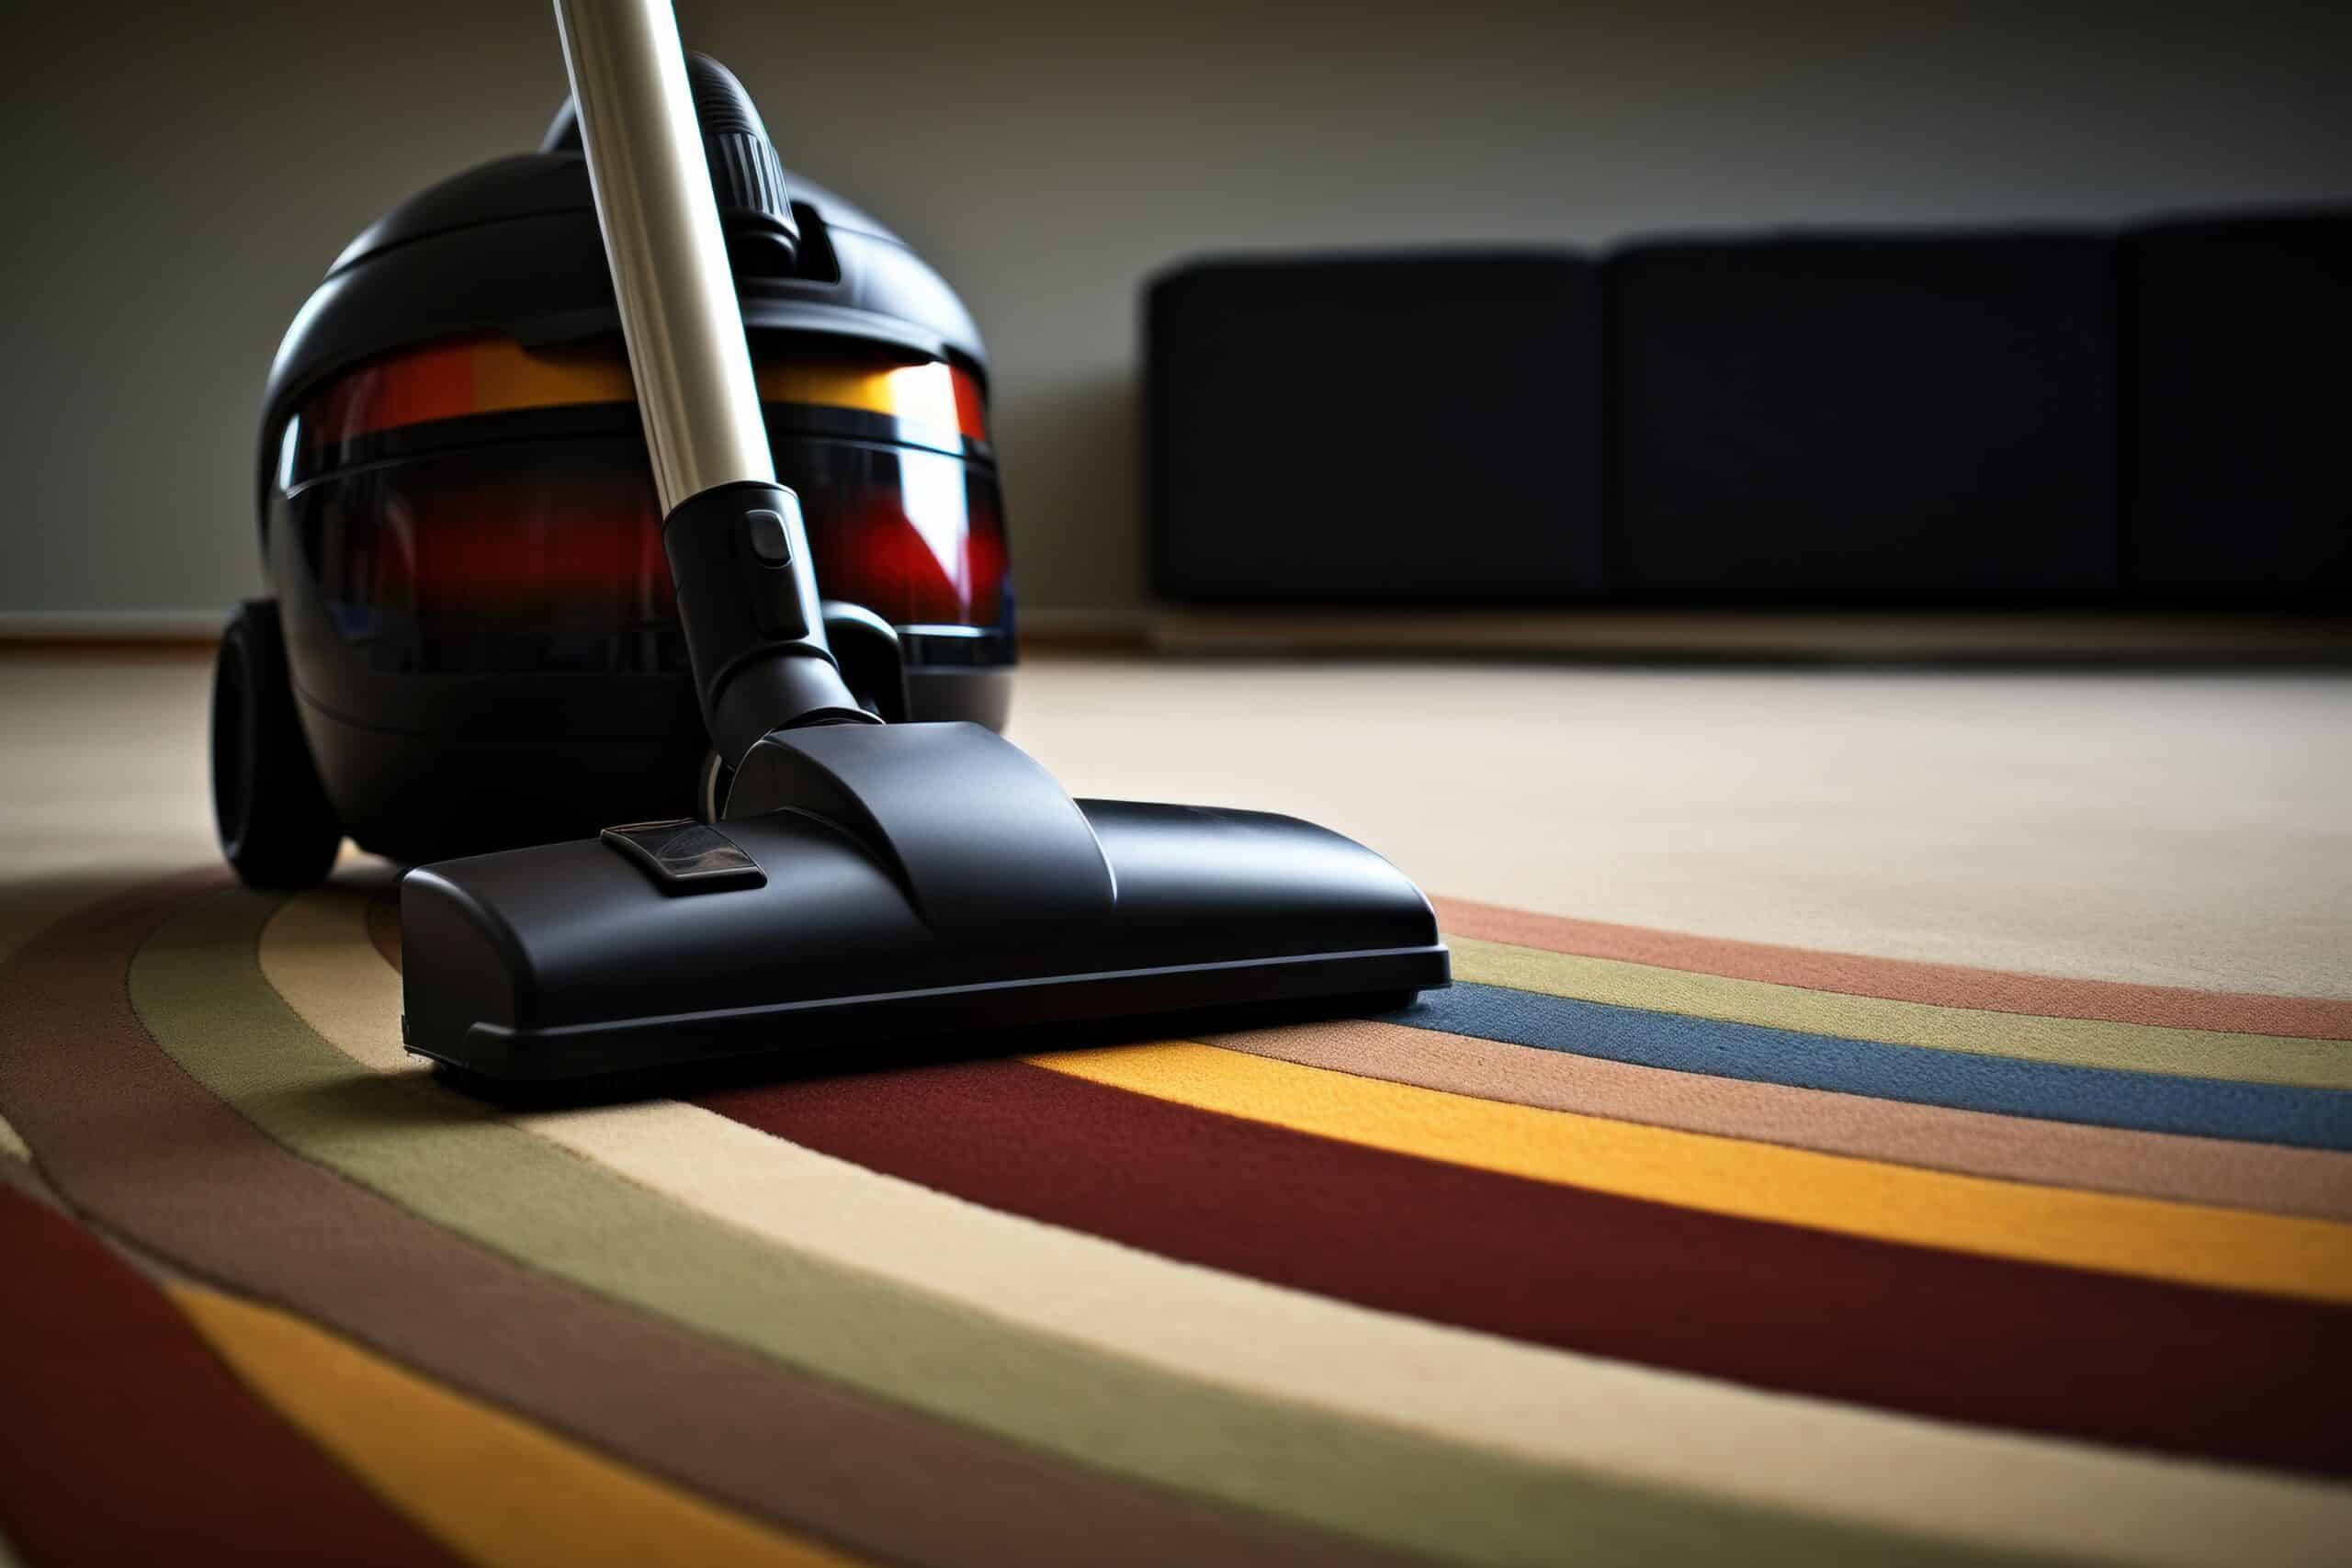 www.appr.com : How To Fix A Vacuum Cleaner With No Suction?